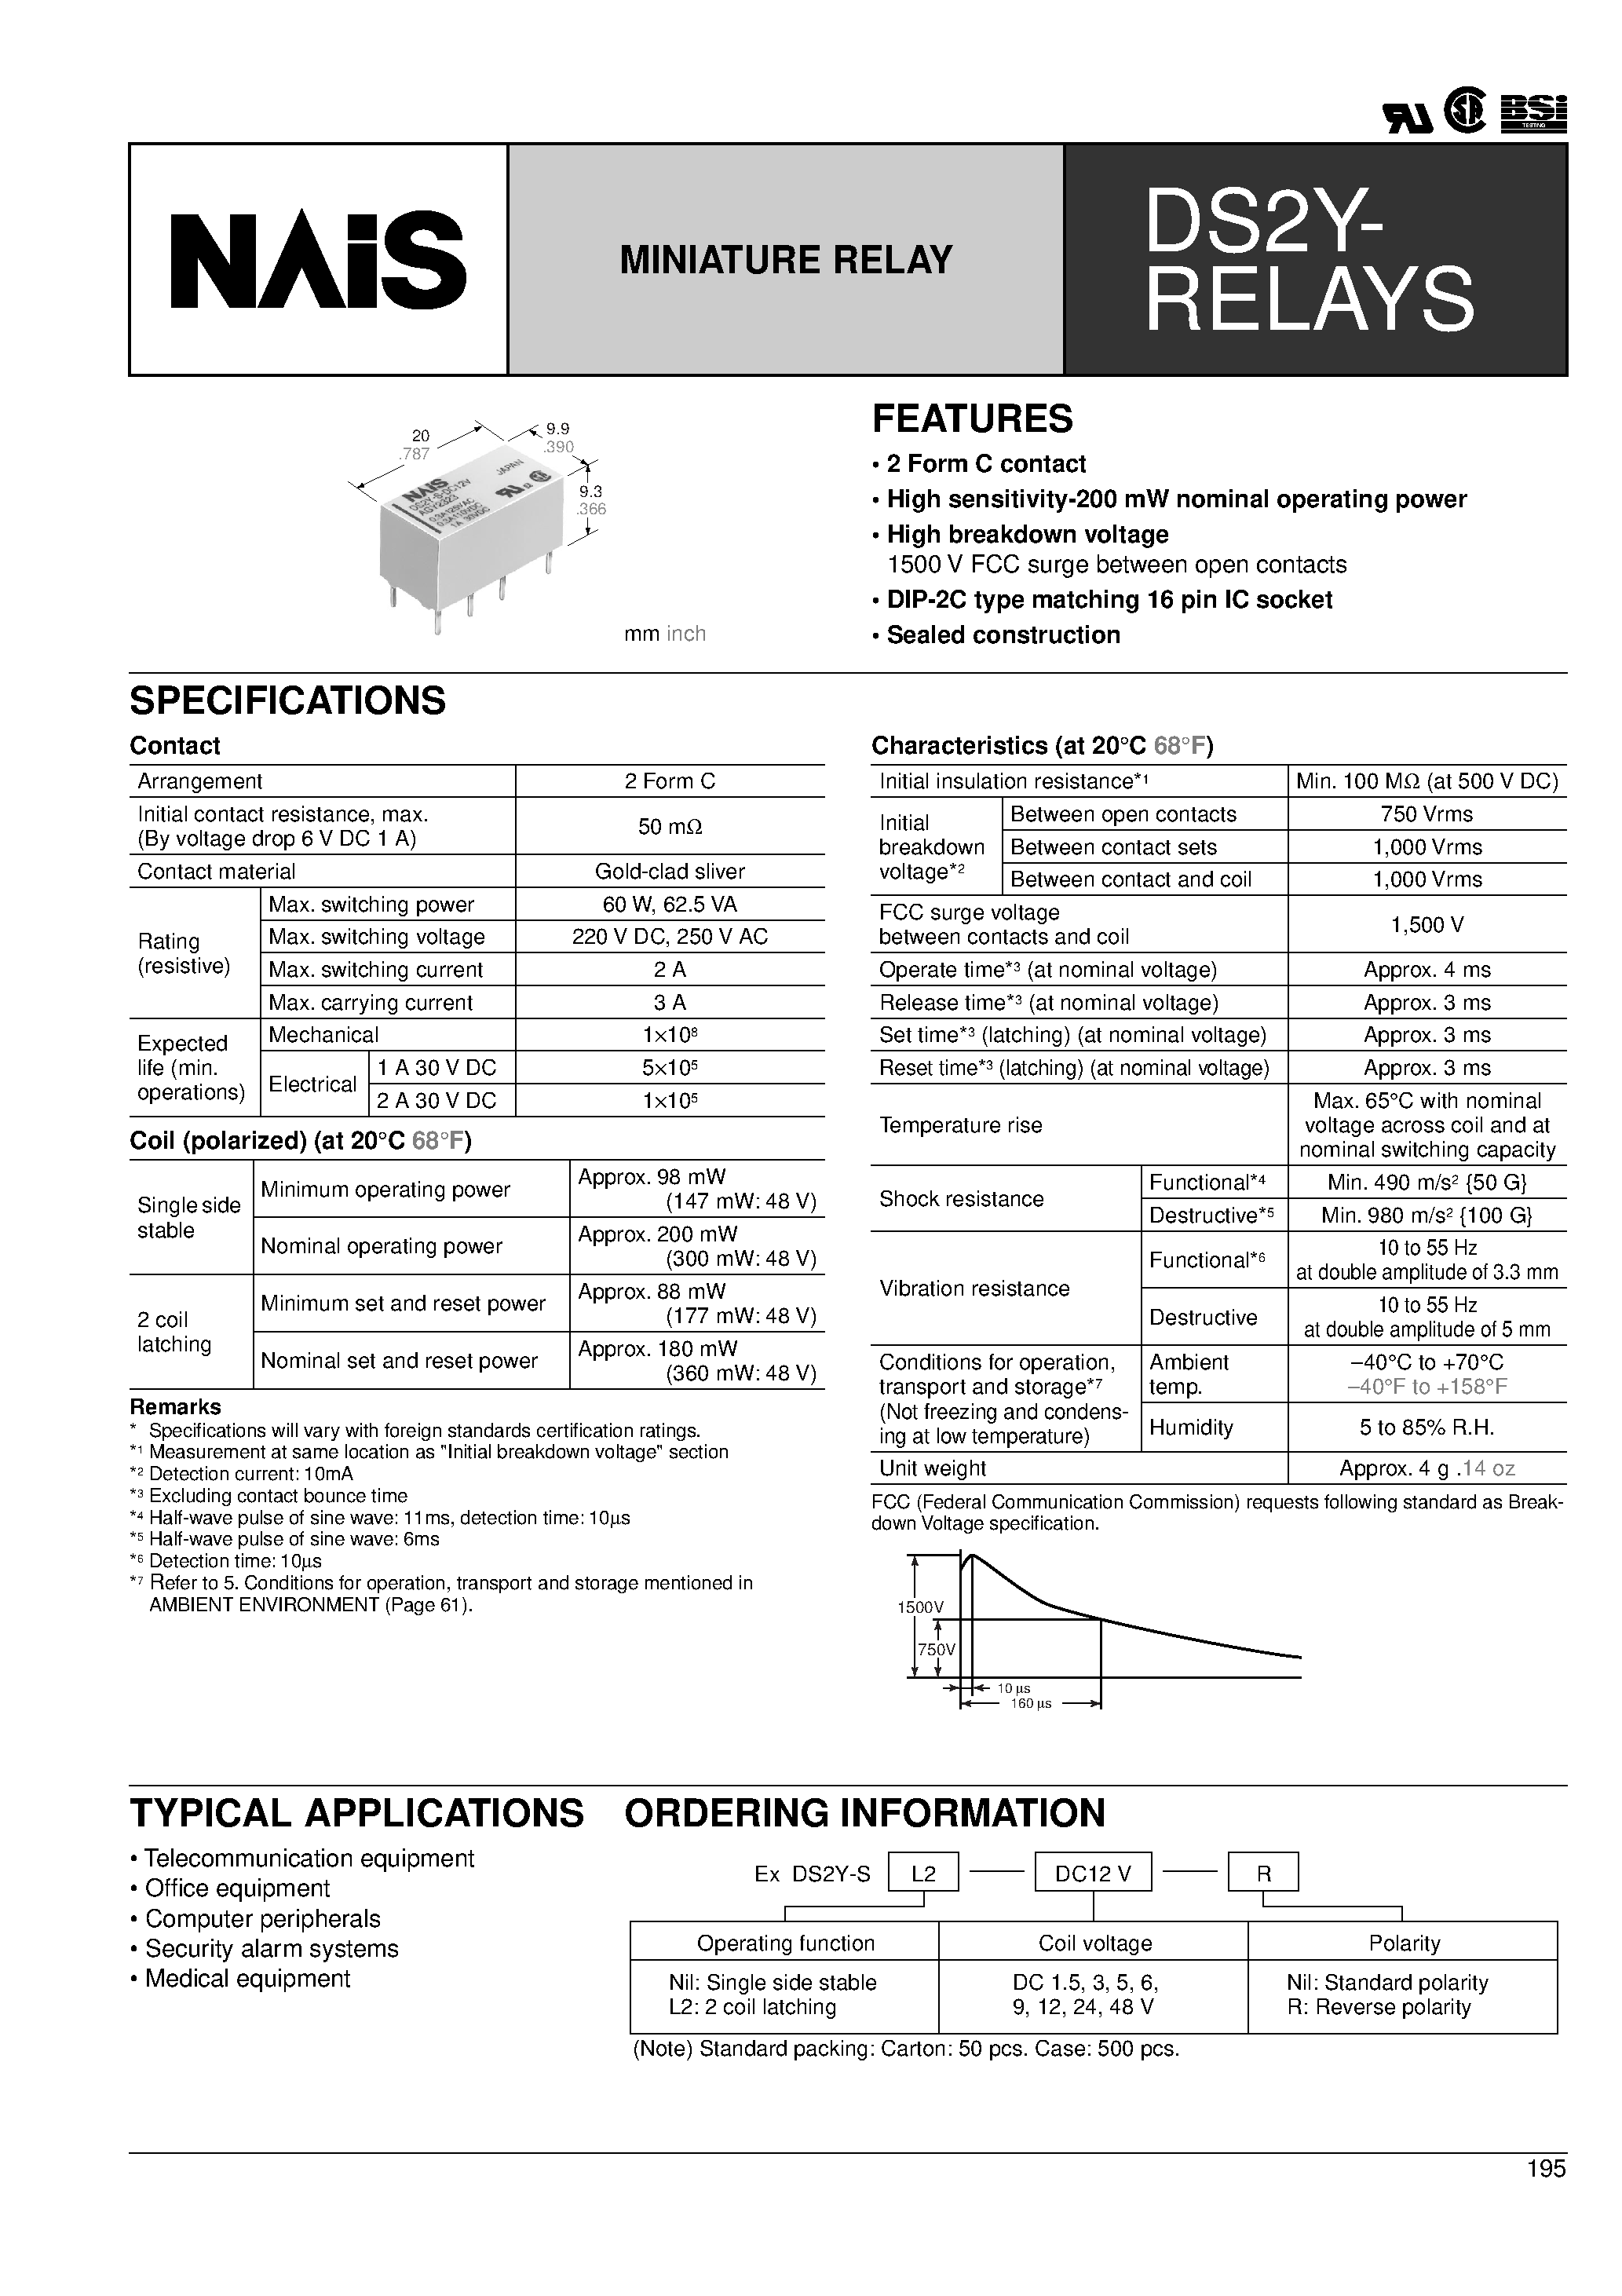 Datasheet DS2Y-S-DC48V - 2 Form C contact High sensitivity-200 mW nominal operating power page 1